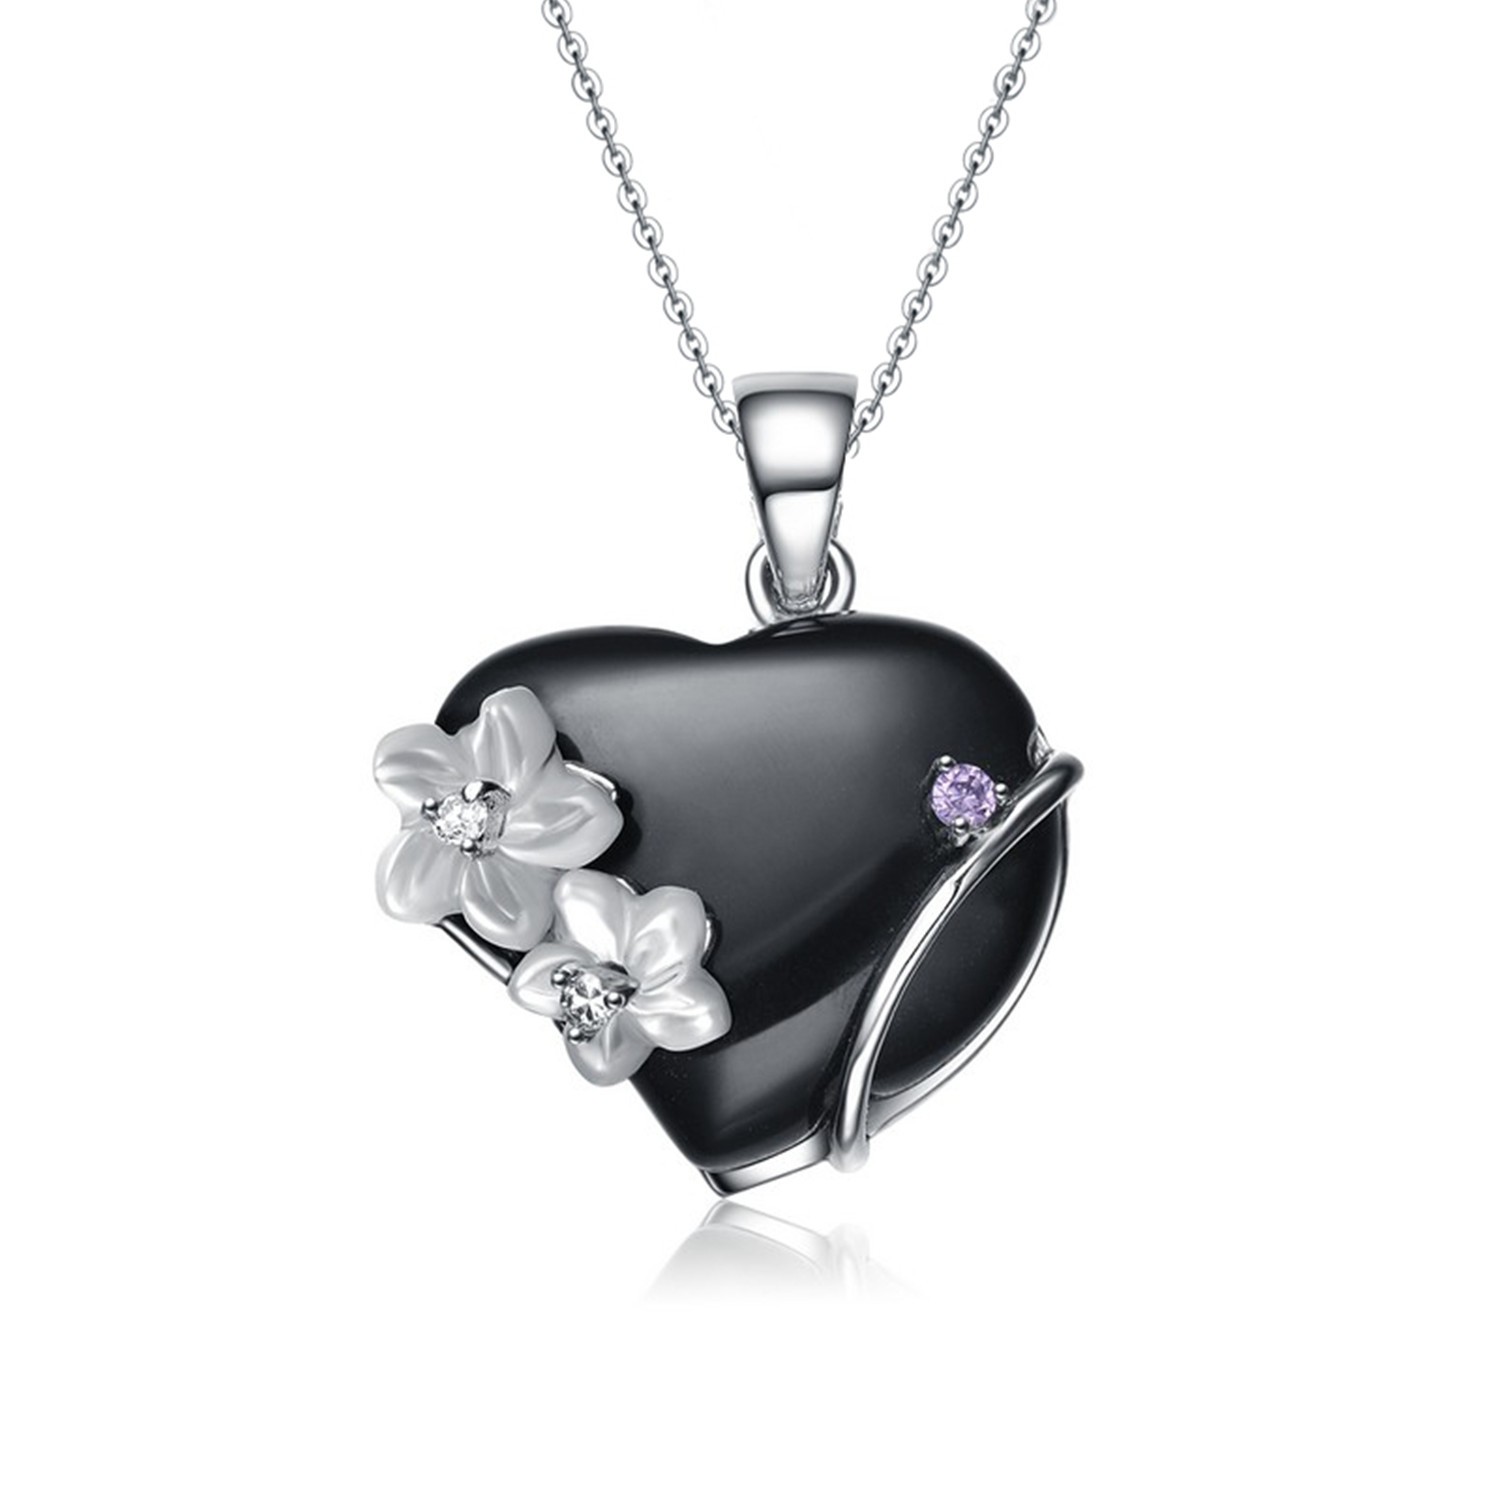 Classic 925 Sterling Silver Pendant Black Agate Heart Necklace Jewelry